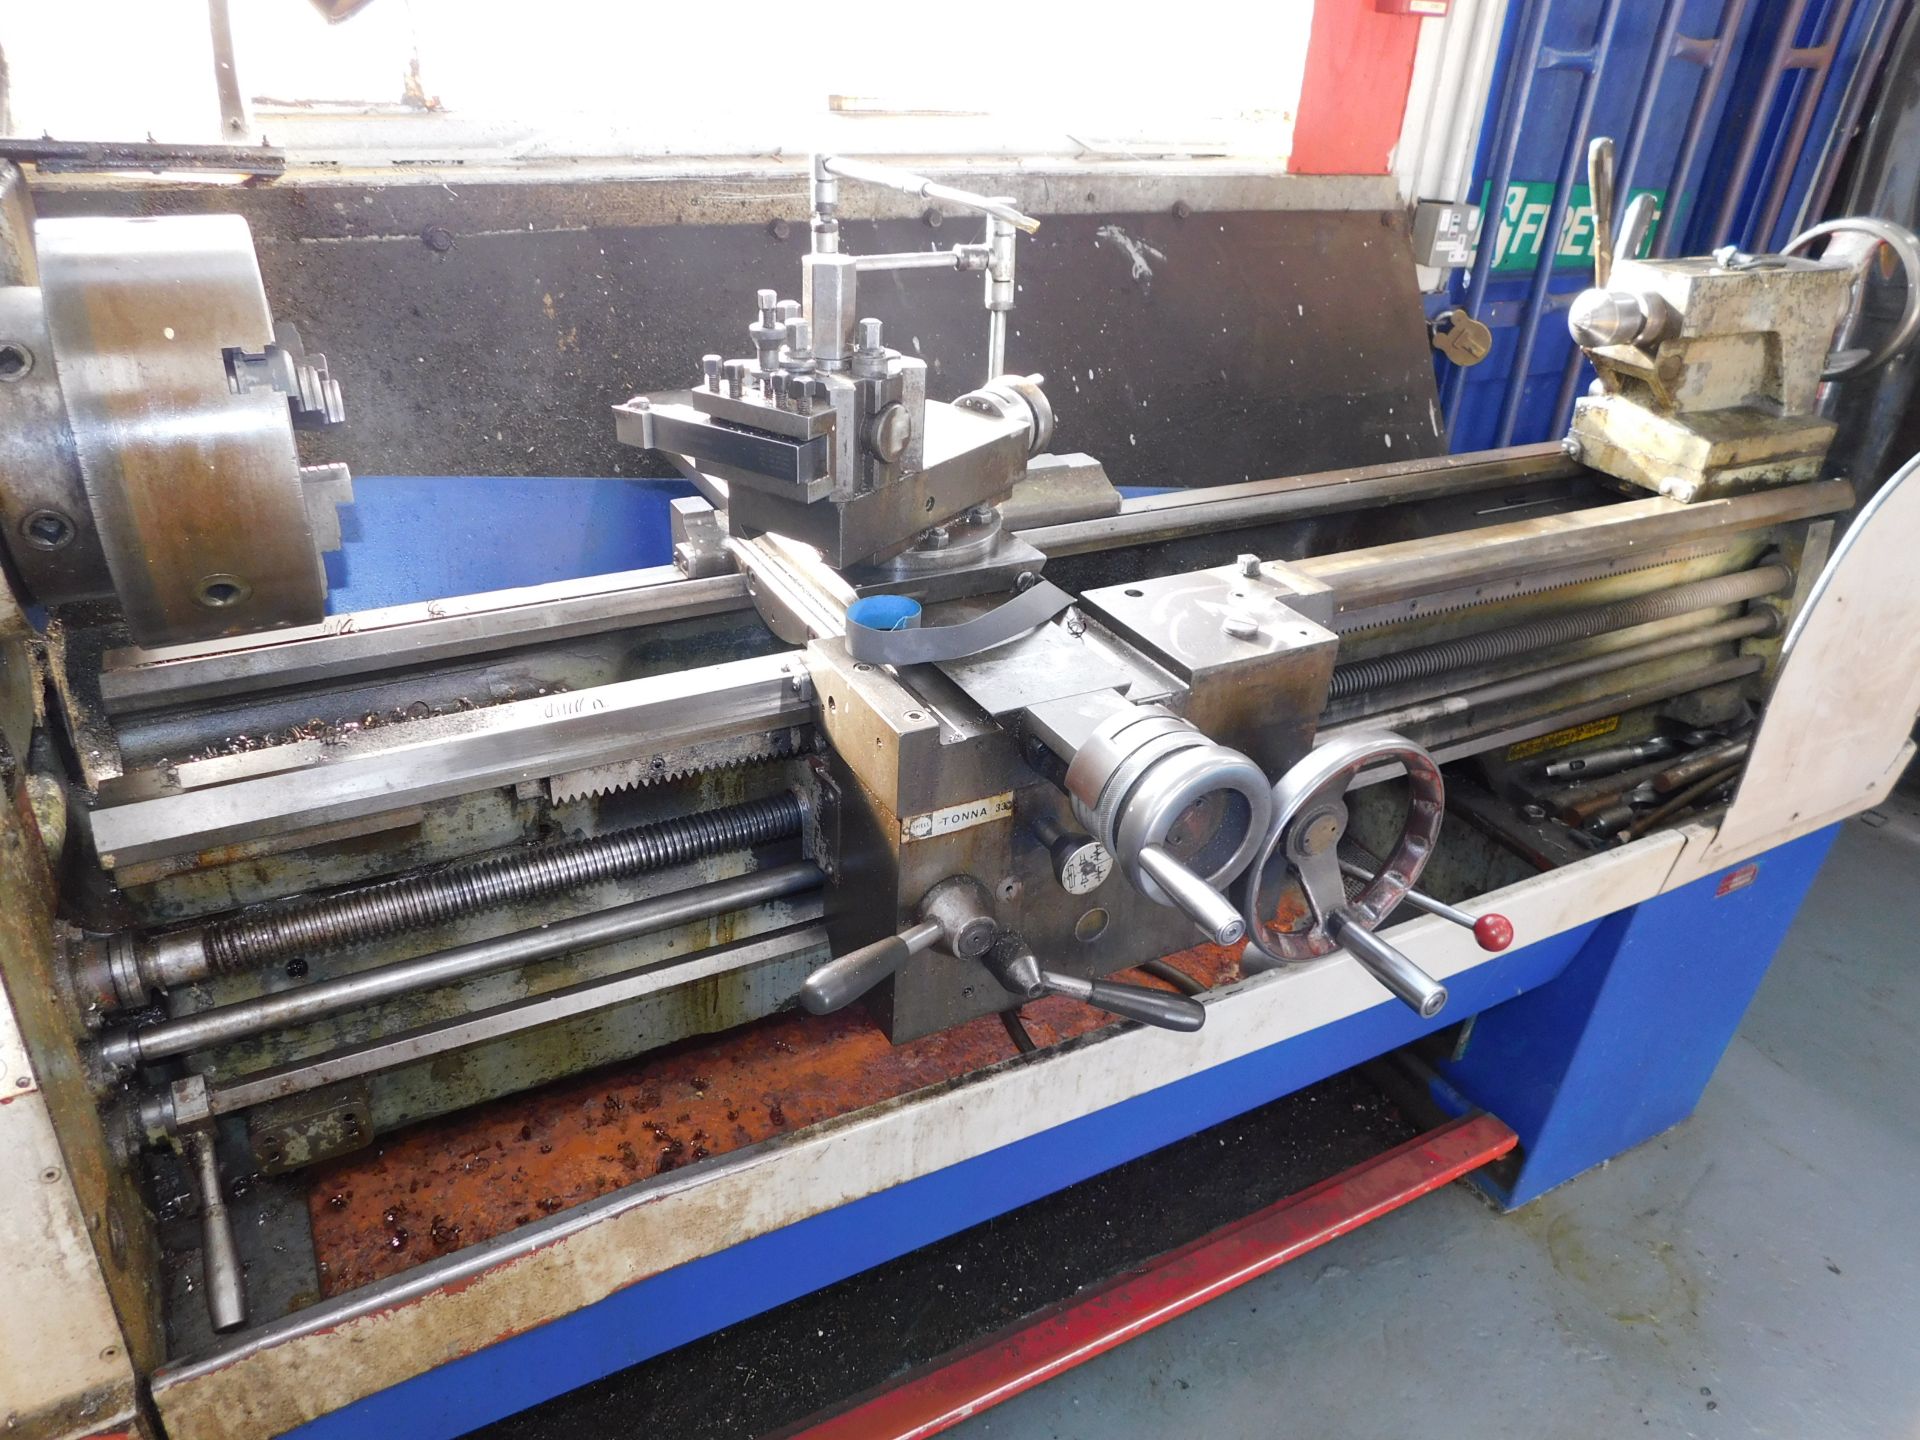 Colchester Triumph 2000 Gap Bed Lathe, Serial Number: 6/0004/06495, 48” between Centres - Image 4 of 4